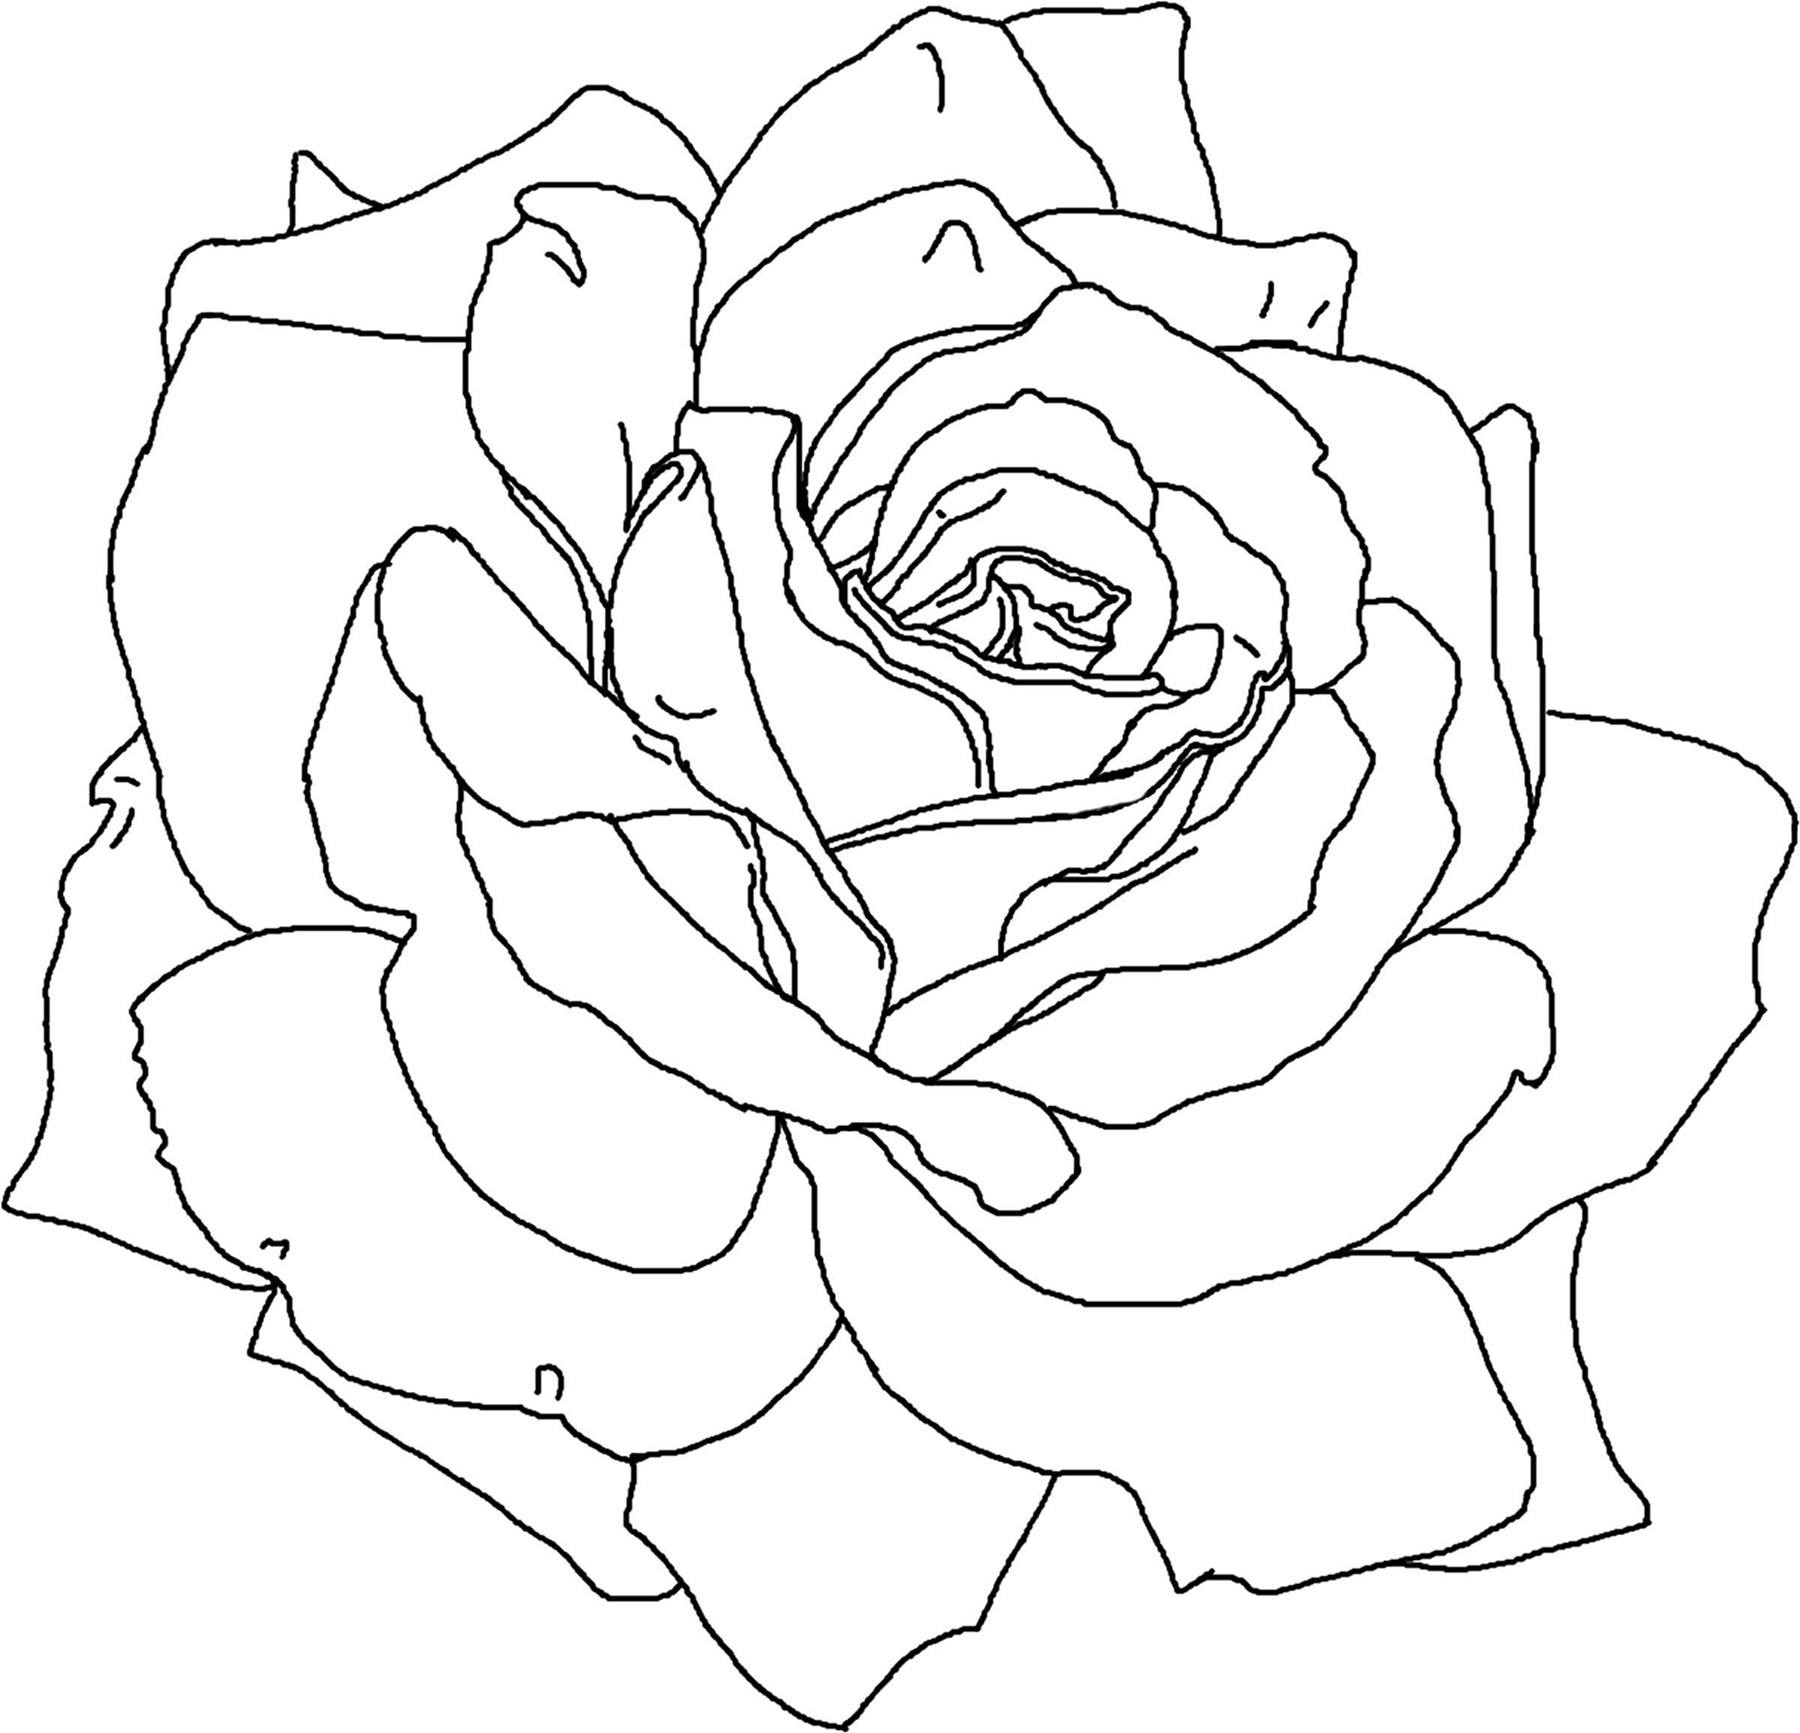 Free Printable Rose Coloring Pages
 Free Printable Flower Coloring Pages For Kids Best